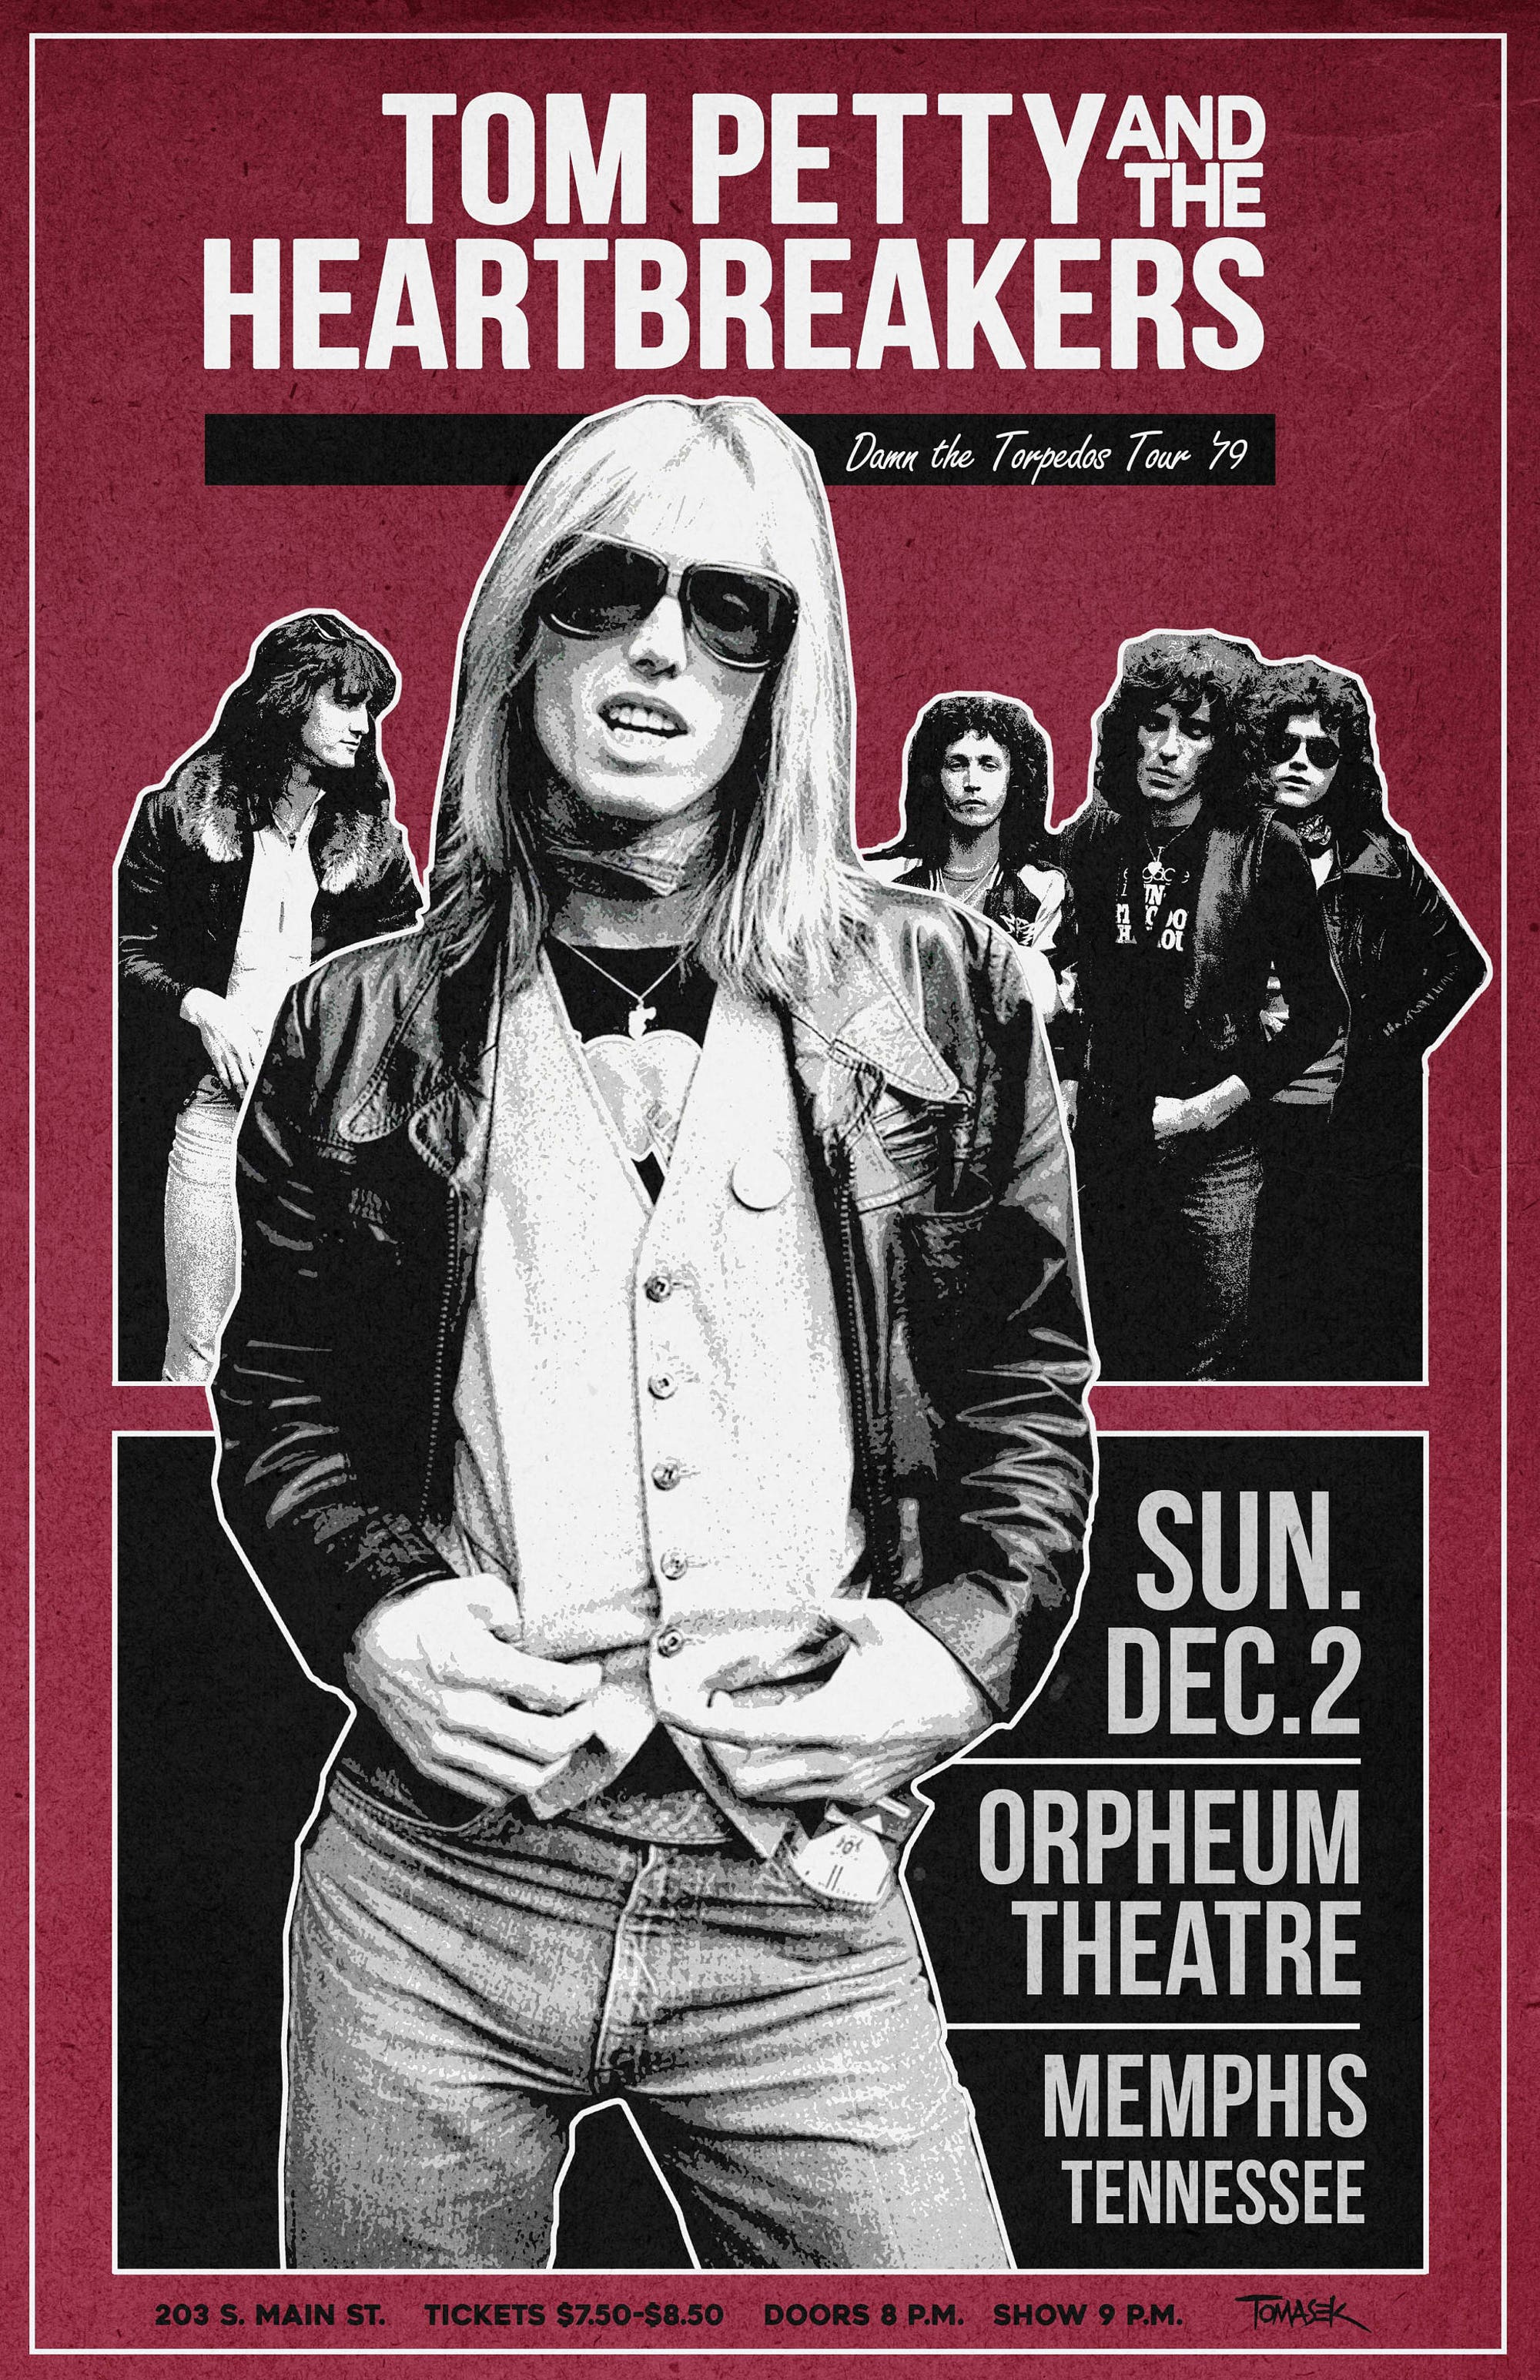 Tom Petty and The Heartbreakers 1979 Concert Poster